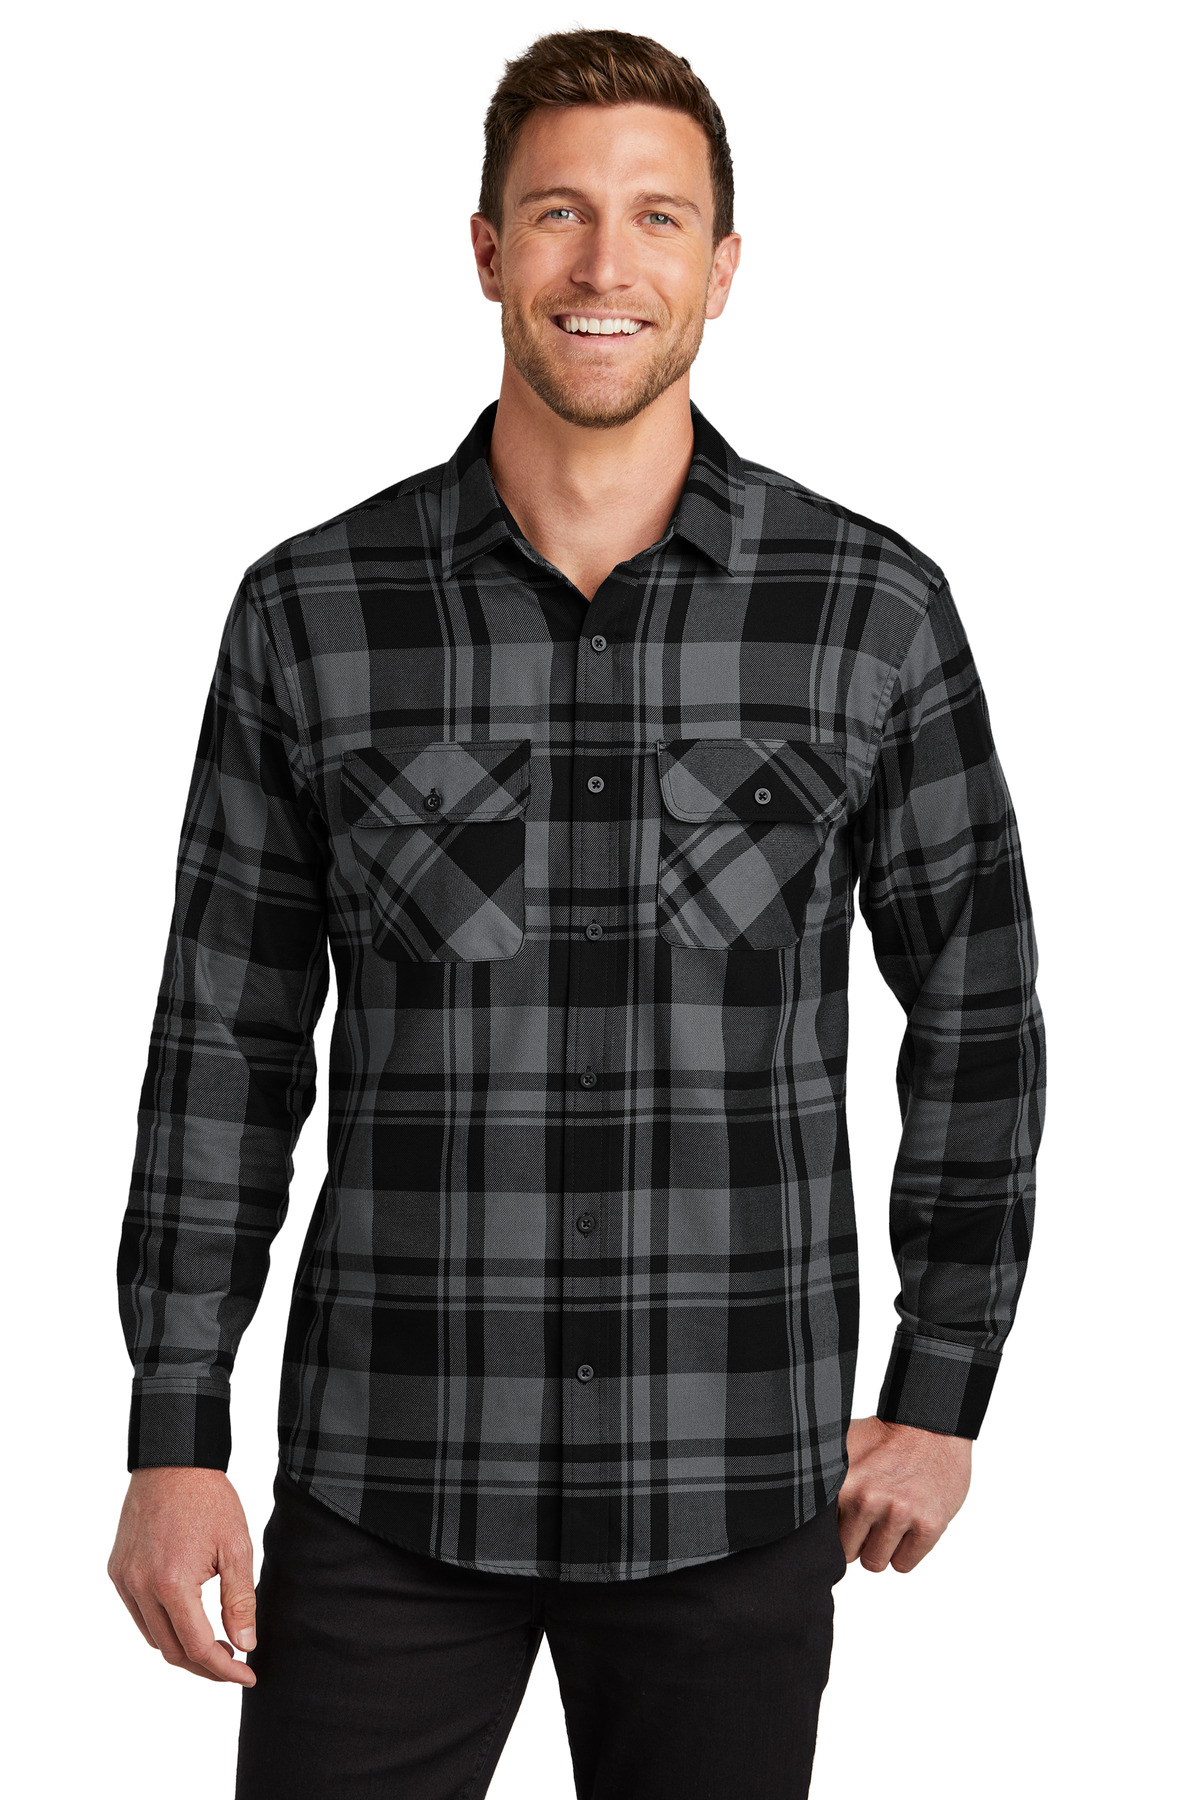 Port Authority Woven Shirts for Hospitality ® Plaid Flannel Shirt.-Port Authority